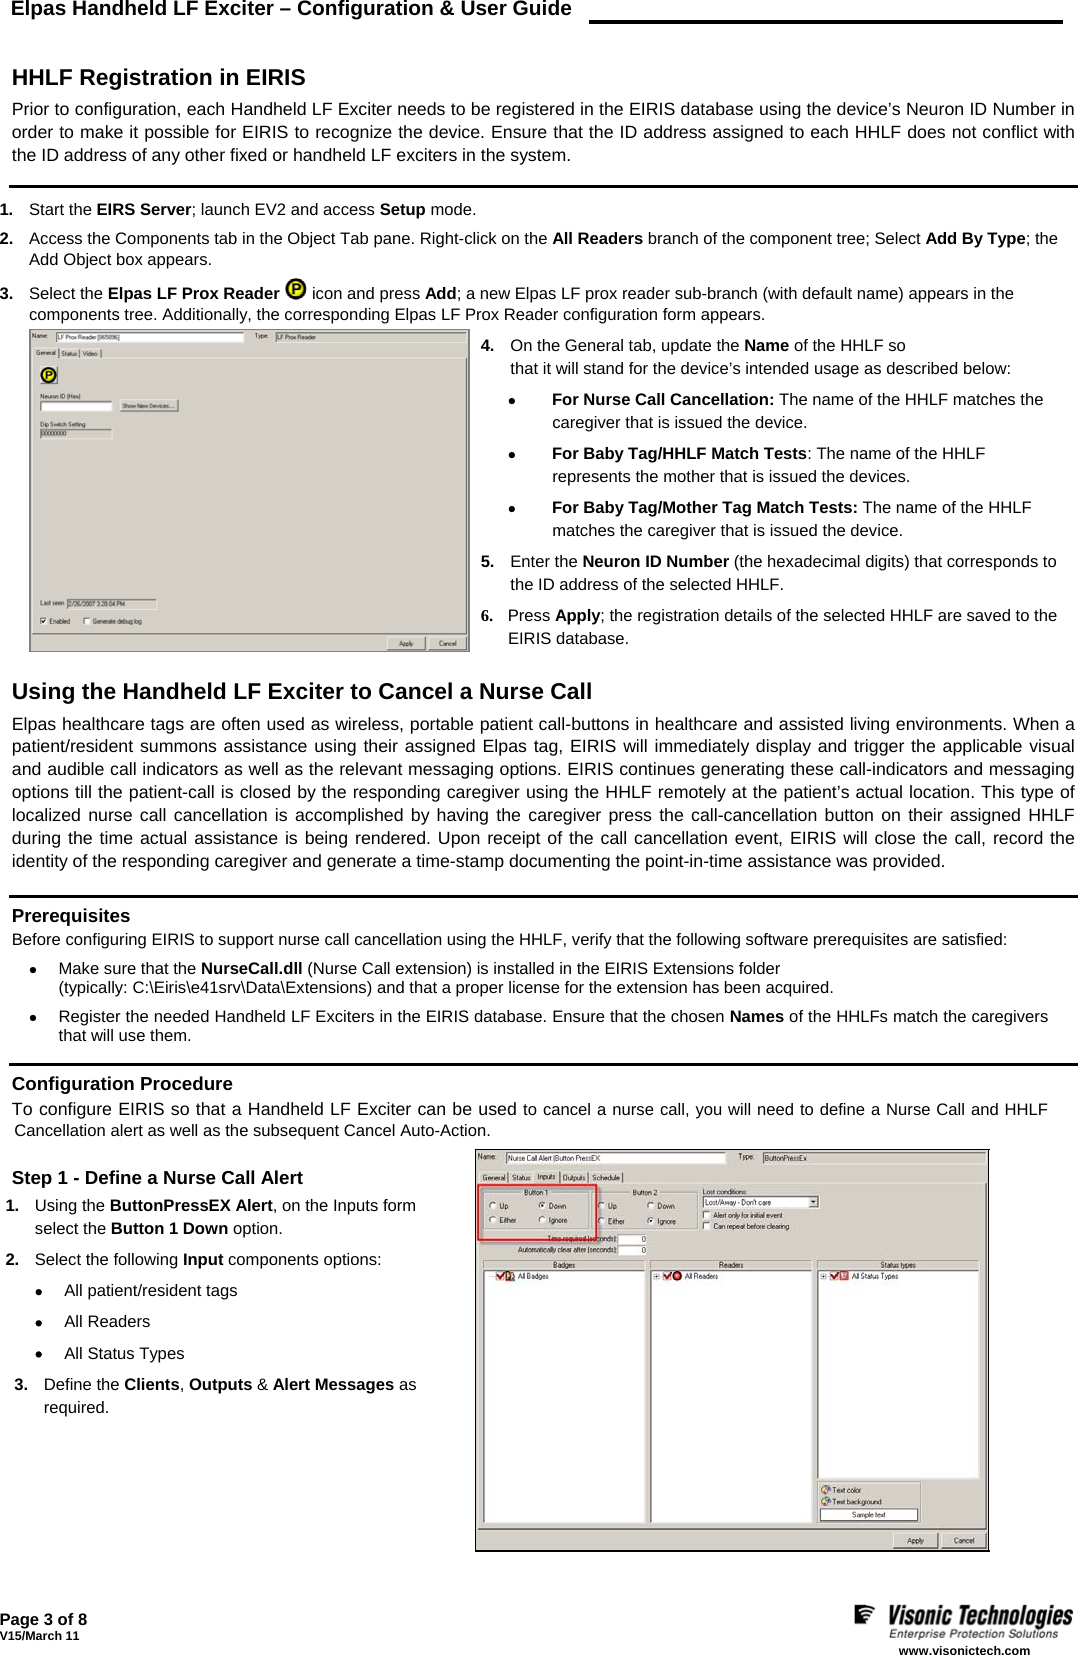 Elpas Handheld LF Exciter – Configuration &amp; User Guide    Page 3 of 8 V15/March 11    www.visonictech.com   HHLF Registration in EIRIS Prior to configuration, each Handheld LF Exciter needs to be registered in the EIRIS database using the device’s Neuron ID Number in order to make it possible for EIRIS to recognize the device. Ensure that the ID address assigned to each HHLF does not conflict with the ID address of any other fixed or handheld LF exciters in the system.  1.  Start the EIRS Server; launch EV2 and access Setup mode. 2.  Access the Components tab in the Object Tab pane. Right-click on the All Readers branch of the component tree; Select Add By Type; the Add Object box appears. 3.  Select the Elpas LF Prox Reader  icon and press Add; a new Elpas LF prox reader sub-branch (with default name) appears in the components tree. Additionally, the corresponding Elpas LF Prox Reader configuration form appears. 4.  On the General tab, update the Name of the HHLF so that it will stand for the device’s intended usage as described below: •  For Nurse Call Cancellation: The name of the HHLF matches the caregiver that is issued the device. •  For Baby Tag/HHLF Match Tests: The name of the HHLF represents the mother that is issued the devices. •  For Baby Tag/Mother Tag Match Tests: The name of the HHLF matches the caregiver that is issued the device. 5.  Enter the Neuron ID Number (the hexadecimal digits) that corresponds to the ID address of the selected HHLF. 6. Press Apply; the registration details of the selected HHLF are saved to the EIRIS database.   Using the Handheld LF Exciter to Cancel a Nurse Call Elpas healthcare tags are often used as wireless, portable patient call-buttons in healthcare and assisted living environments. When a patient/resident summons assistance using their assigned Elpas tag, EIRIS will immediately display and trigger the applicable visual and audible call indicators as well as the relevant messaging options. EIRIS continues generating these call-indicators and messaging options till the patient-call is closed by the responding caregiver using the HHLF remotely at the patient’s actual location. This type of localized nurse call cancellation is accomplished by having the caregiver press the call-cancellation button on their assigned HHLF during the time actual assistance is being rendered. Upon receipt of the call cancellation event, EIRIS will close the call, record the identity of the responding caregiver and generate a time-stamp documenting the point-in-time assistance was provided.  Prerequisites Before configuring EIRIS to support nurse call cancellation using the HHLF, verify that the following software prerequisites are satisfied: • Make sure that the NurseCall.dll (Nurse Call extension) is installed in the EIRIS Extensions folder  (typically: C:\Eiris\e41srv\Data\Extensions) and that a proper license for the extension has been acquired. • Register the needed Handheld LF Exciters in the EIRIS database. Ensure that the chosen Names of the HHLFs match the caregivers that will use them.  Configuration Procedure To configure EIRIS so that a Handheld LF Exciter can be used to cancel a nurse call, you will need to define a Nurse Call and HHLF Cancellation alert as well as the subsequent Cancel Auto-Action.  Step 1 - Define a Nurse Call Alert 1.  Using the ButtonPressEX Alert, on the Inputs form select the Button 1 Down option. 2.  Select the following Input components options: • All patient/resident tags • All Readers  • All Status Types 3.  Define the Clients, Outputs &amp; Alert Messages as required.        